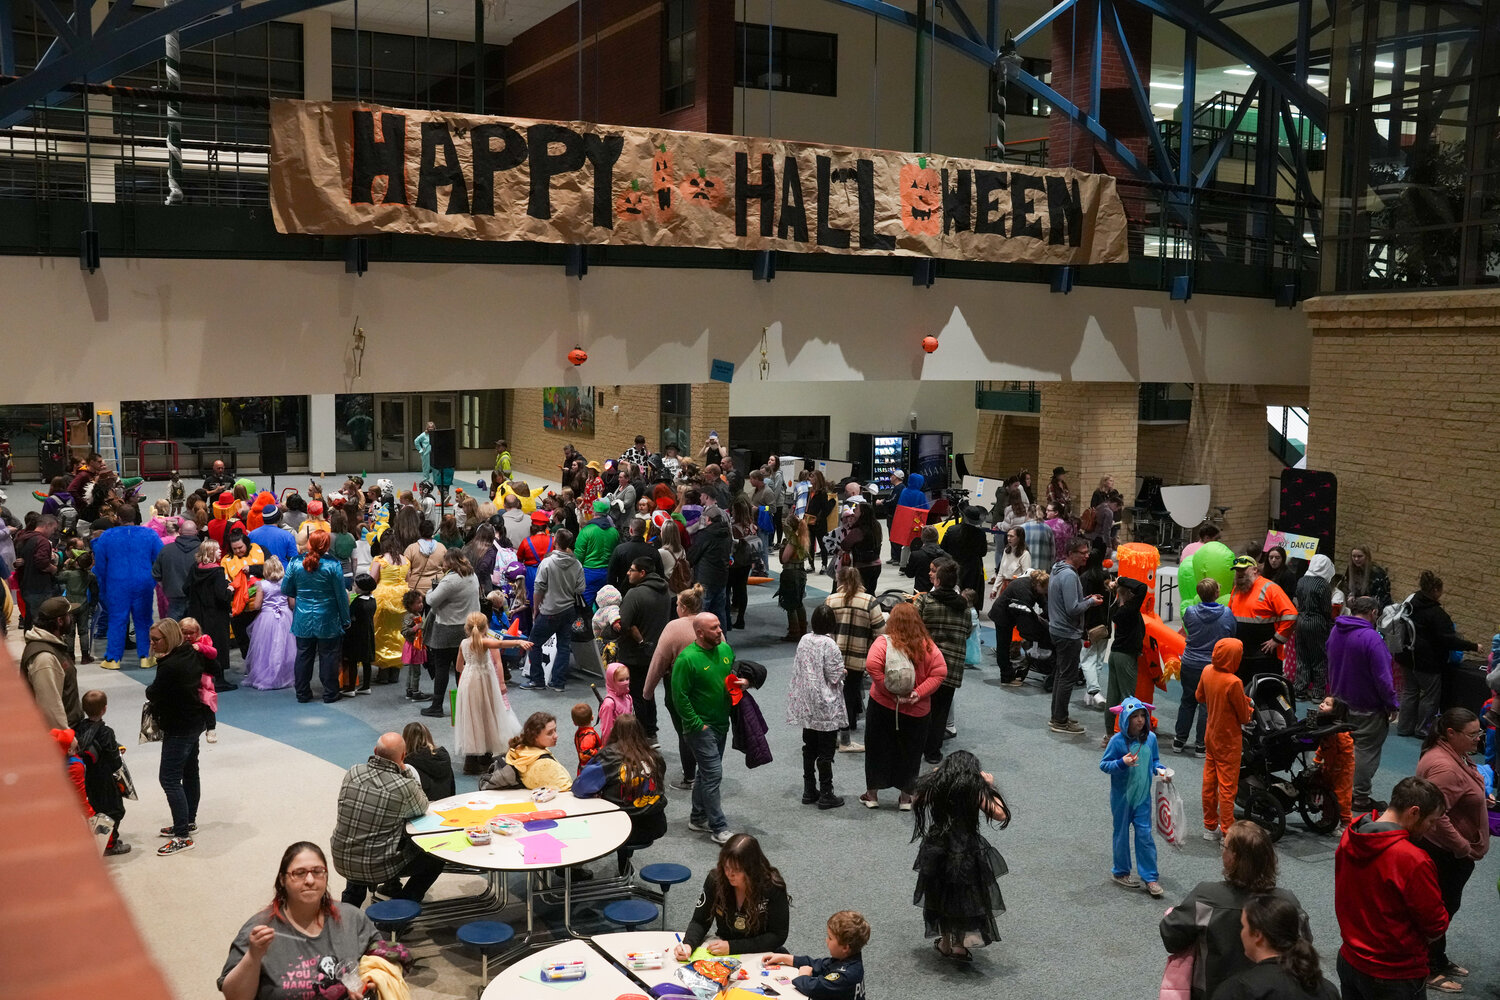 The crowd for the Community Halloween Party was huge, with more than 2,100 people accounted for at the event, it was a busy few hours.